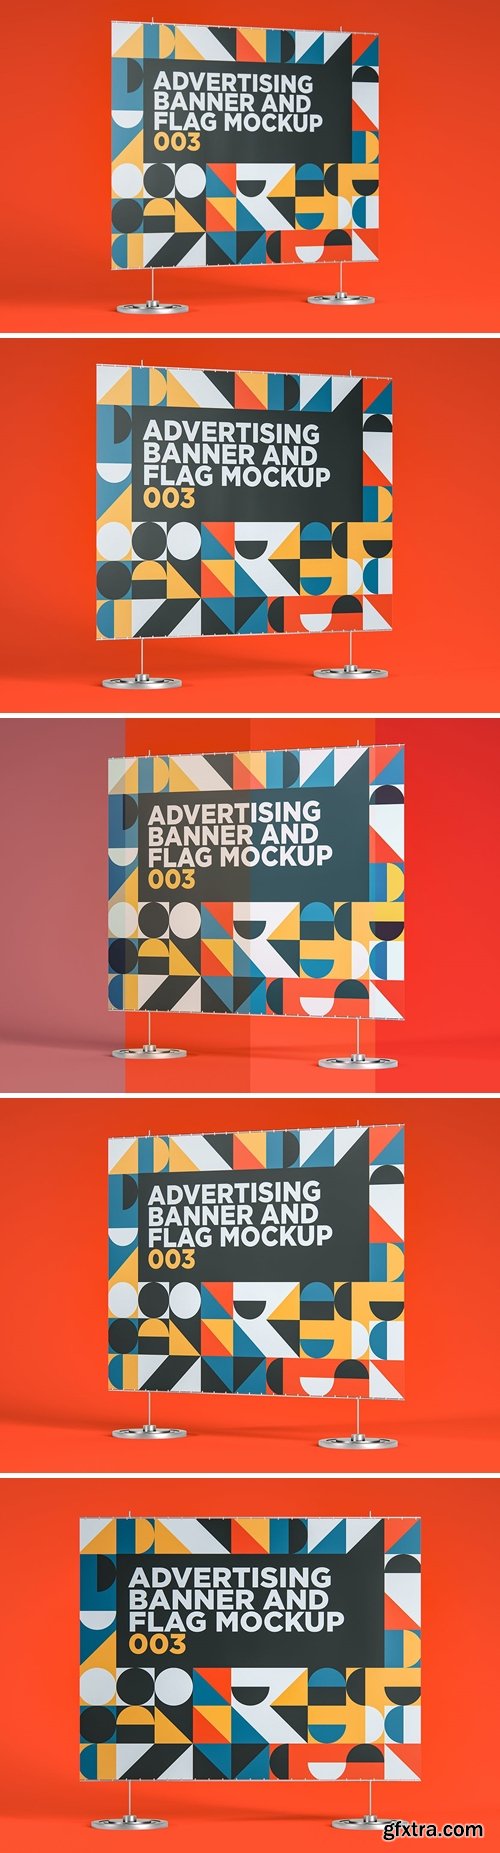 Advertising Banner And Flag Mockup 003